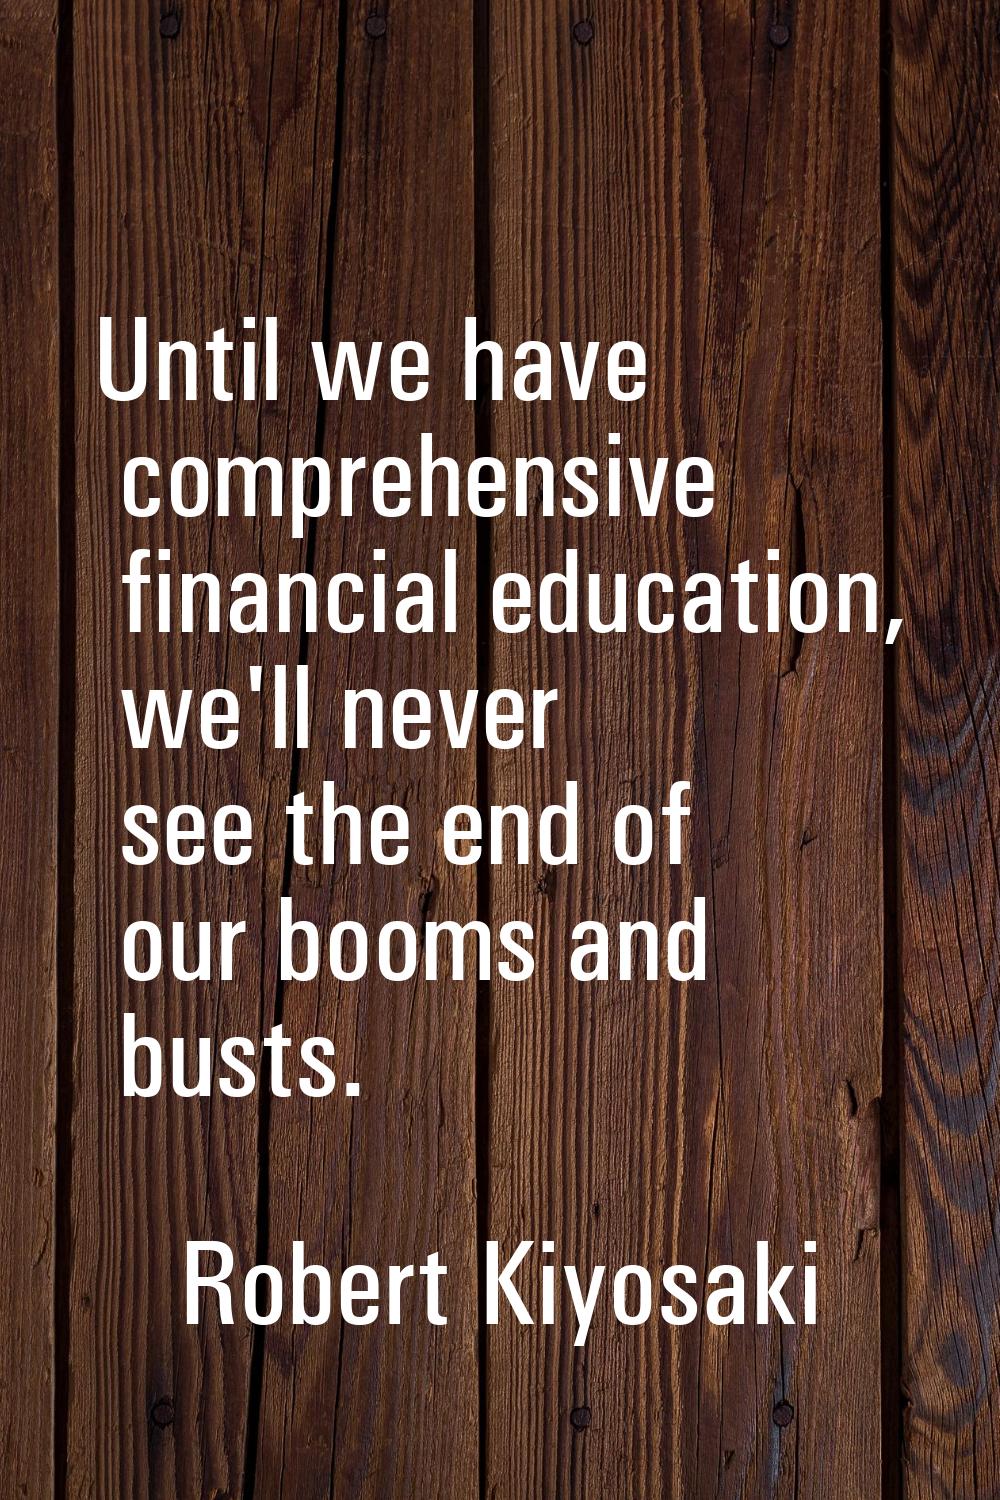 Until we have comprehensive financial education, we'll never see the end of our booms and busts.